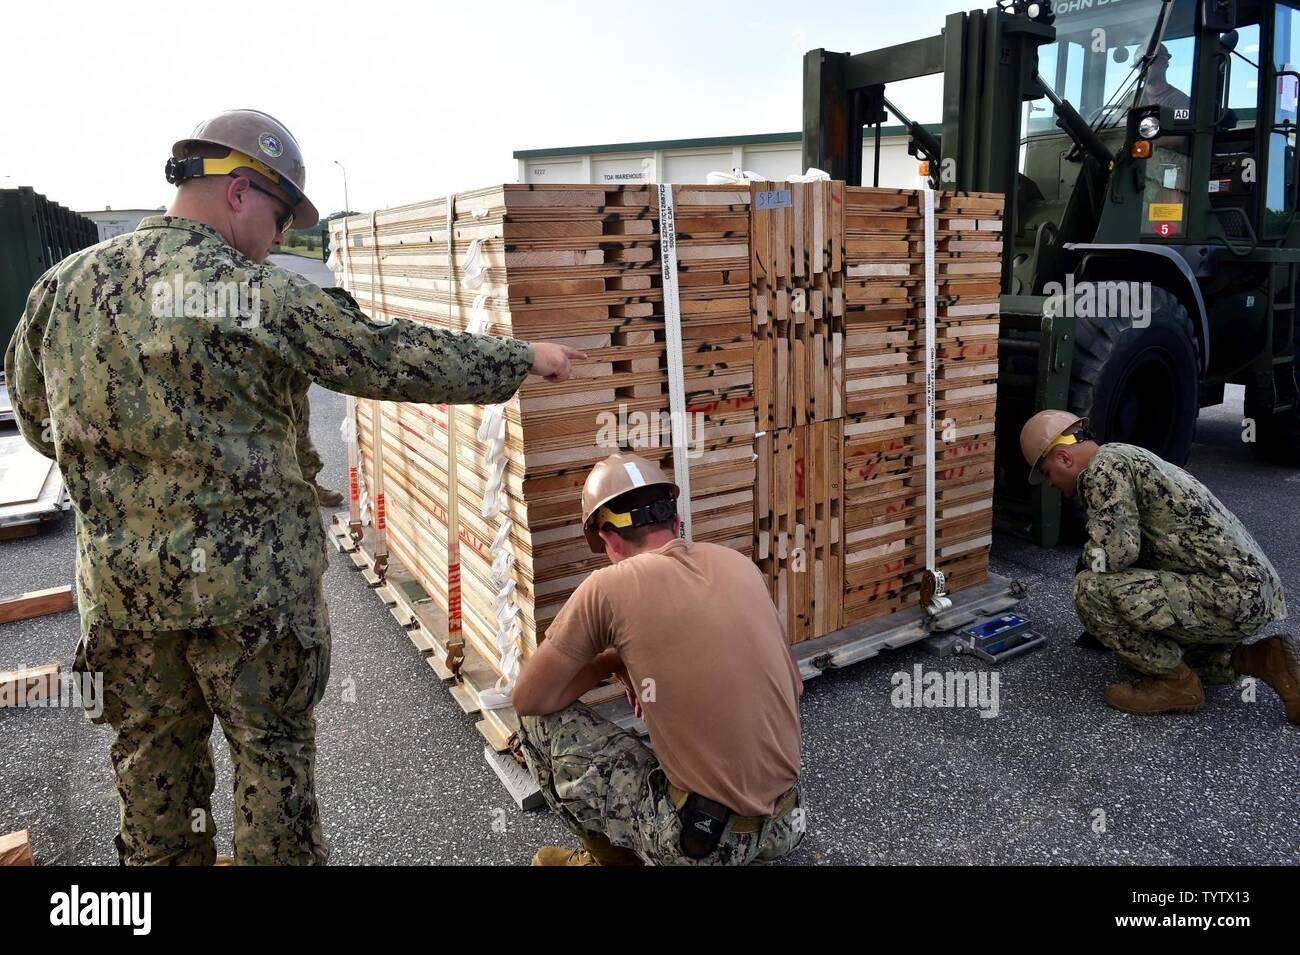 OKINAWA, Japan (Nov. 29, 2016) Petty Officer 2nd Class Bernard Barbuto, a Seabee assigned to Naval Mobile Construction Battalion (NMCB) 5, gives directions to a forklift operator while weighing a pallet on Camp Shields during an embark exercise. The exercise tests the commands ability to mobilize within 48 hours to react to different types of types of contingency operations around the world. NMCB 5 is the forward deployed Western Pacific NMCB ready to support Major Combat Operations, Humanitarian Assistance and Disaster Relief operations, and to provide general engineering and civil support to Stock Photo